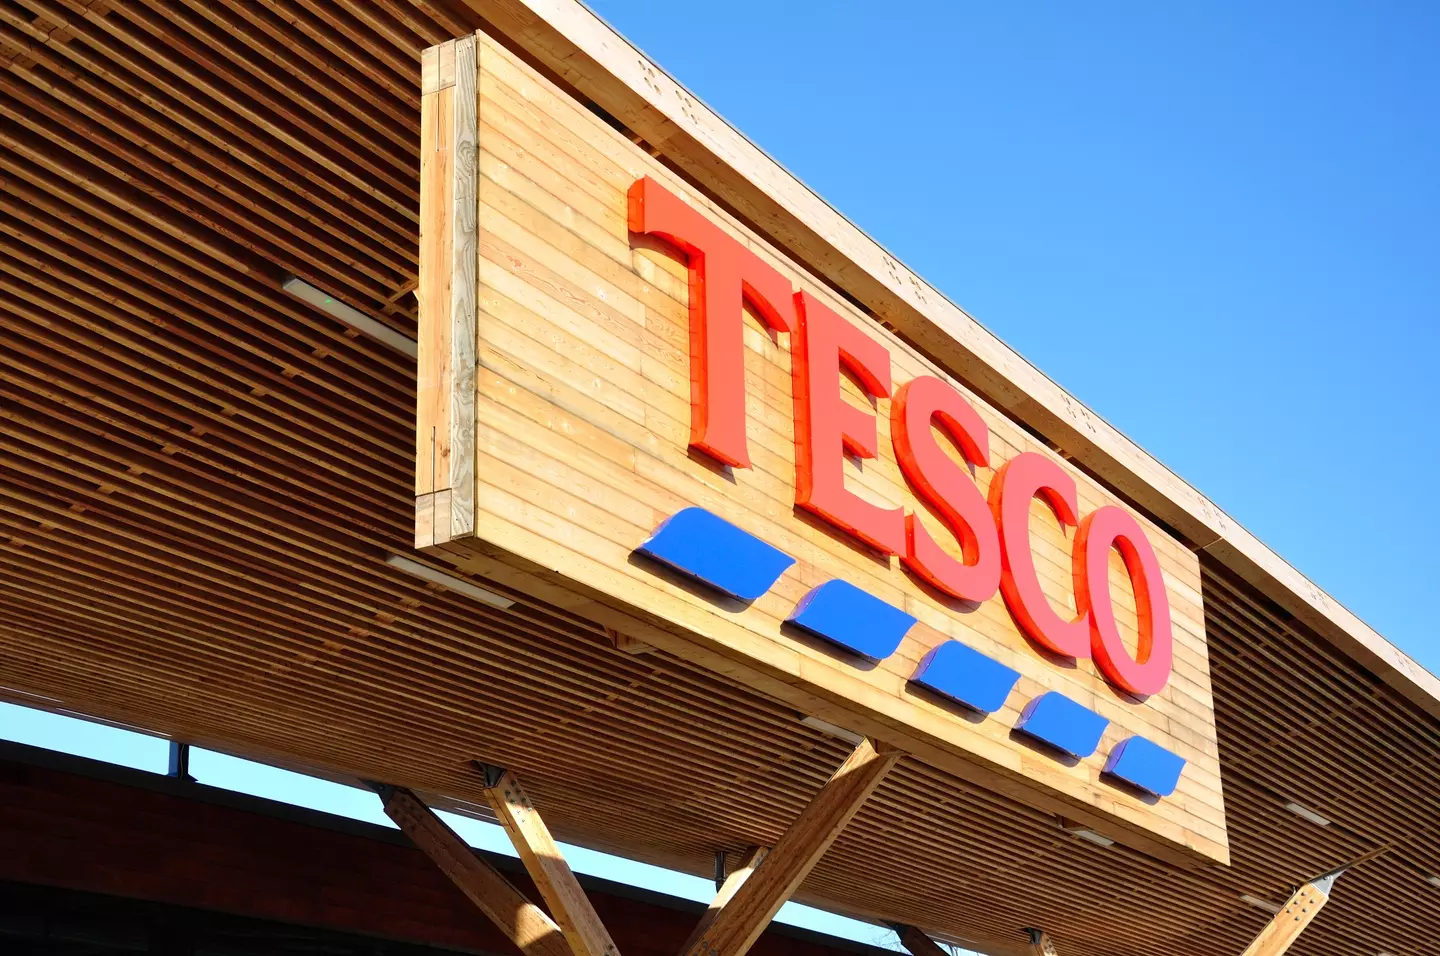 A number of different pet foods including Whiskas, Dreamies and Pedigree have been axed from Tesco shelves.